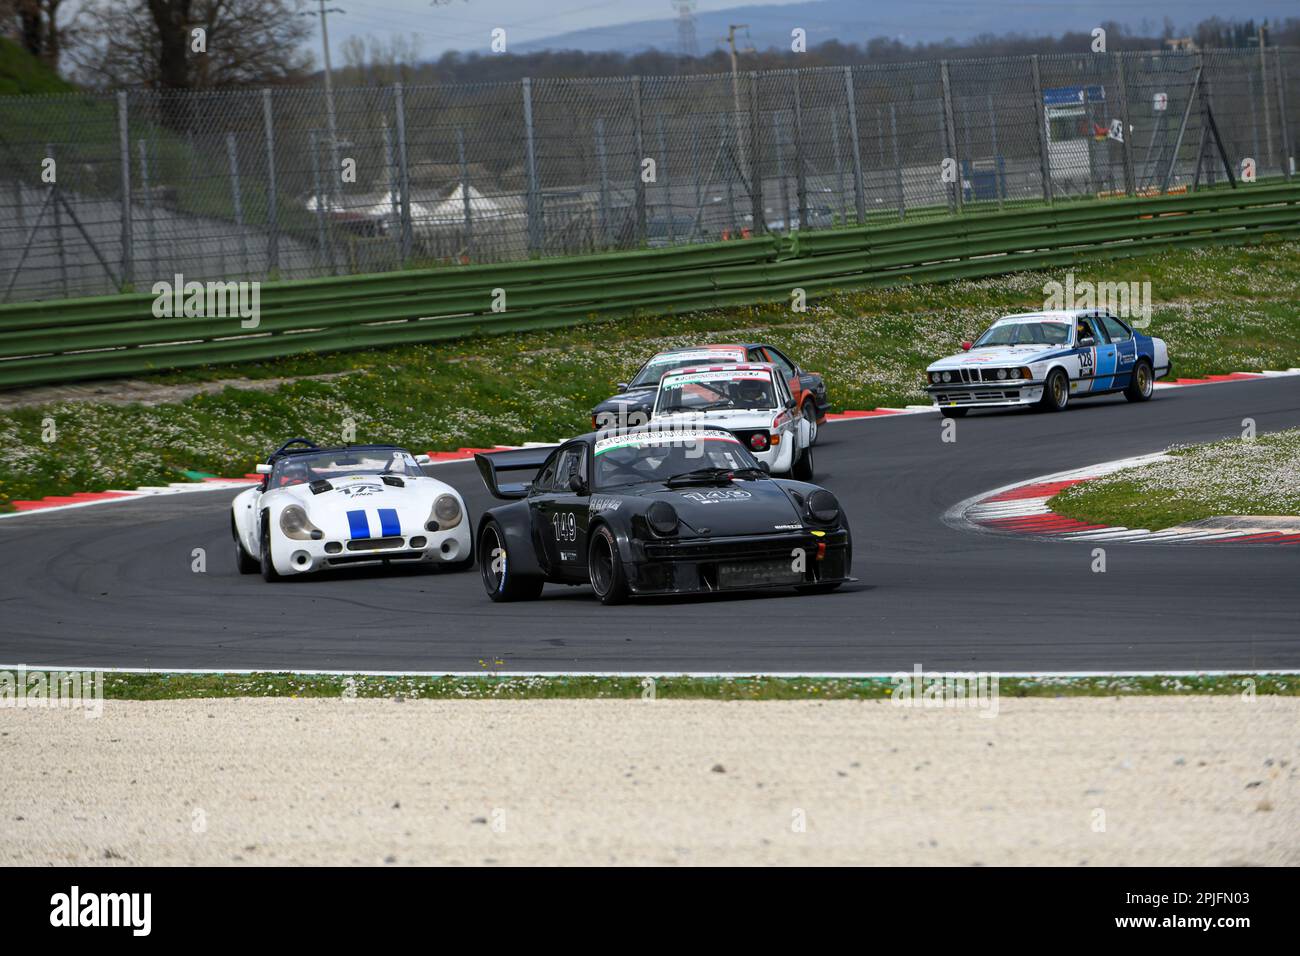 Vallelunga 'Piero Taruffi' circuit, Racing weekend, April 2nd 2023, Italy. Motorsport Historical car race, 300 Km di Vallelunga. Porsche 930 leads group of cars in action during the race. Photo Credit: Fabio Pagani/Alamy Live News Stock Photo